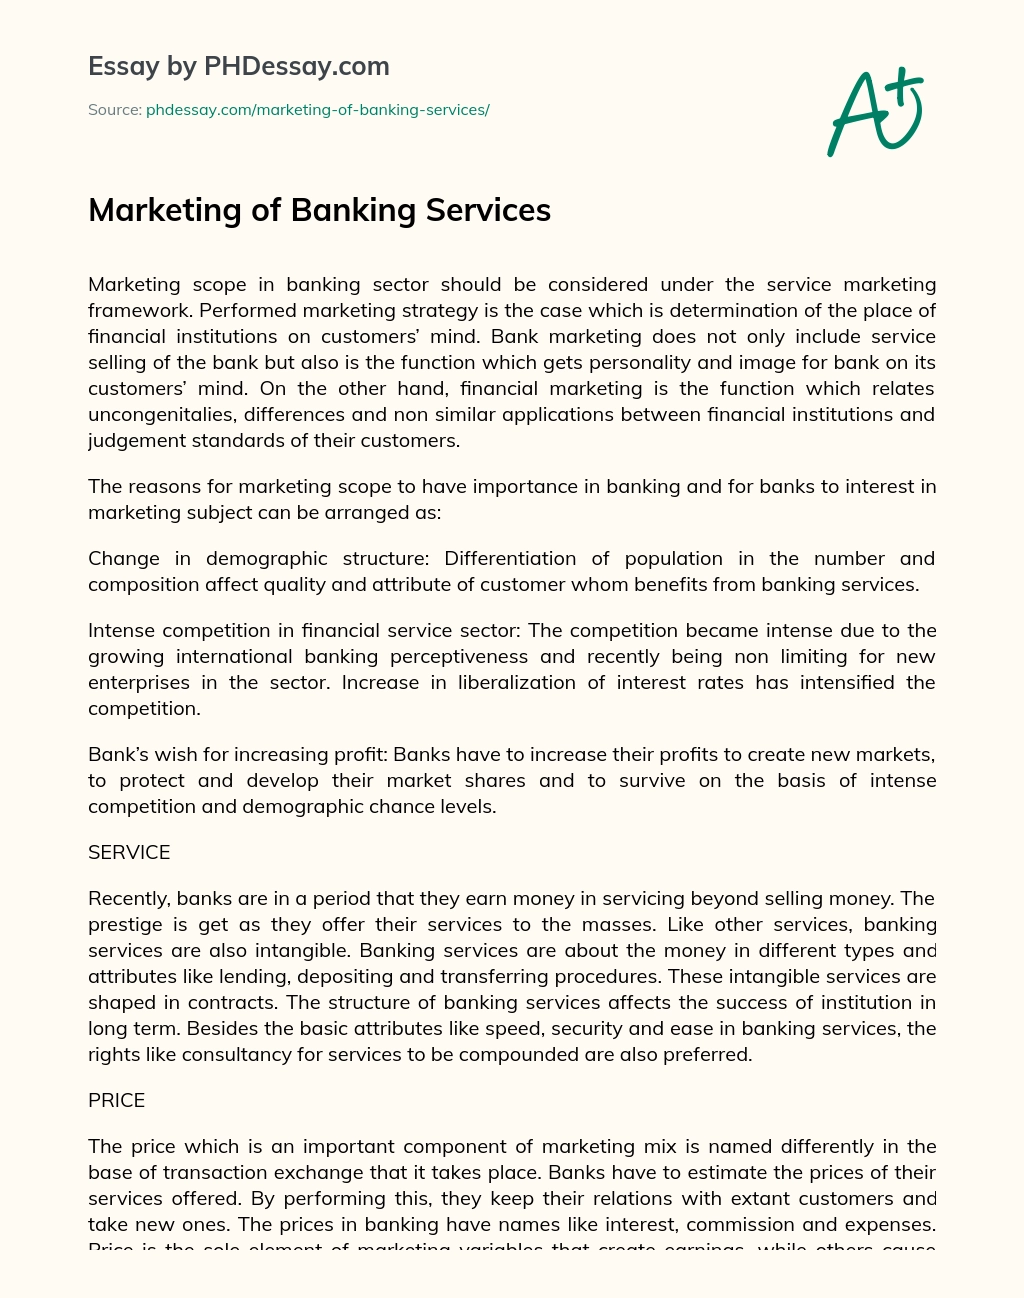 Marketing of Banking Services essay